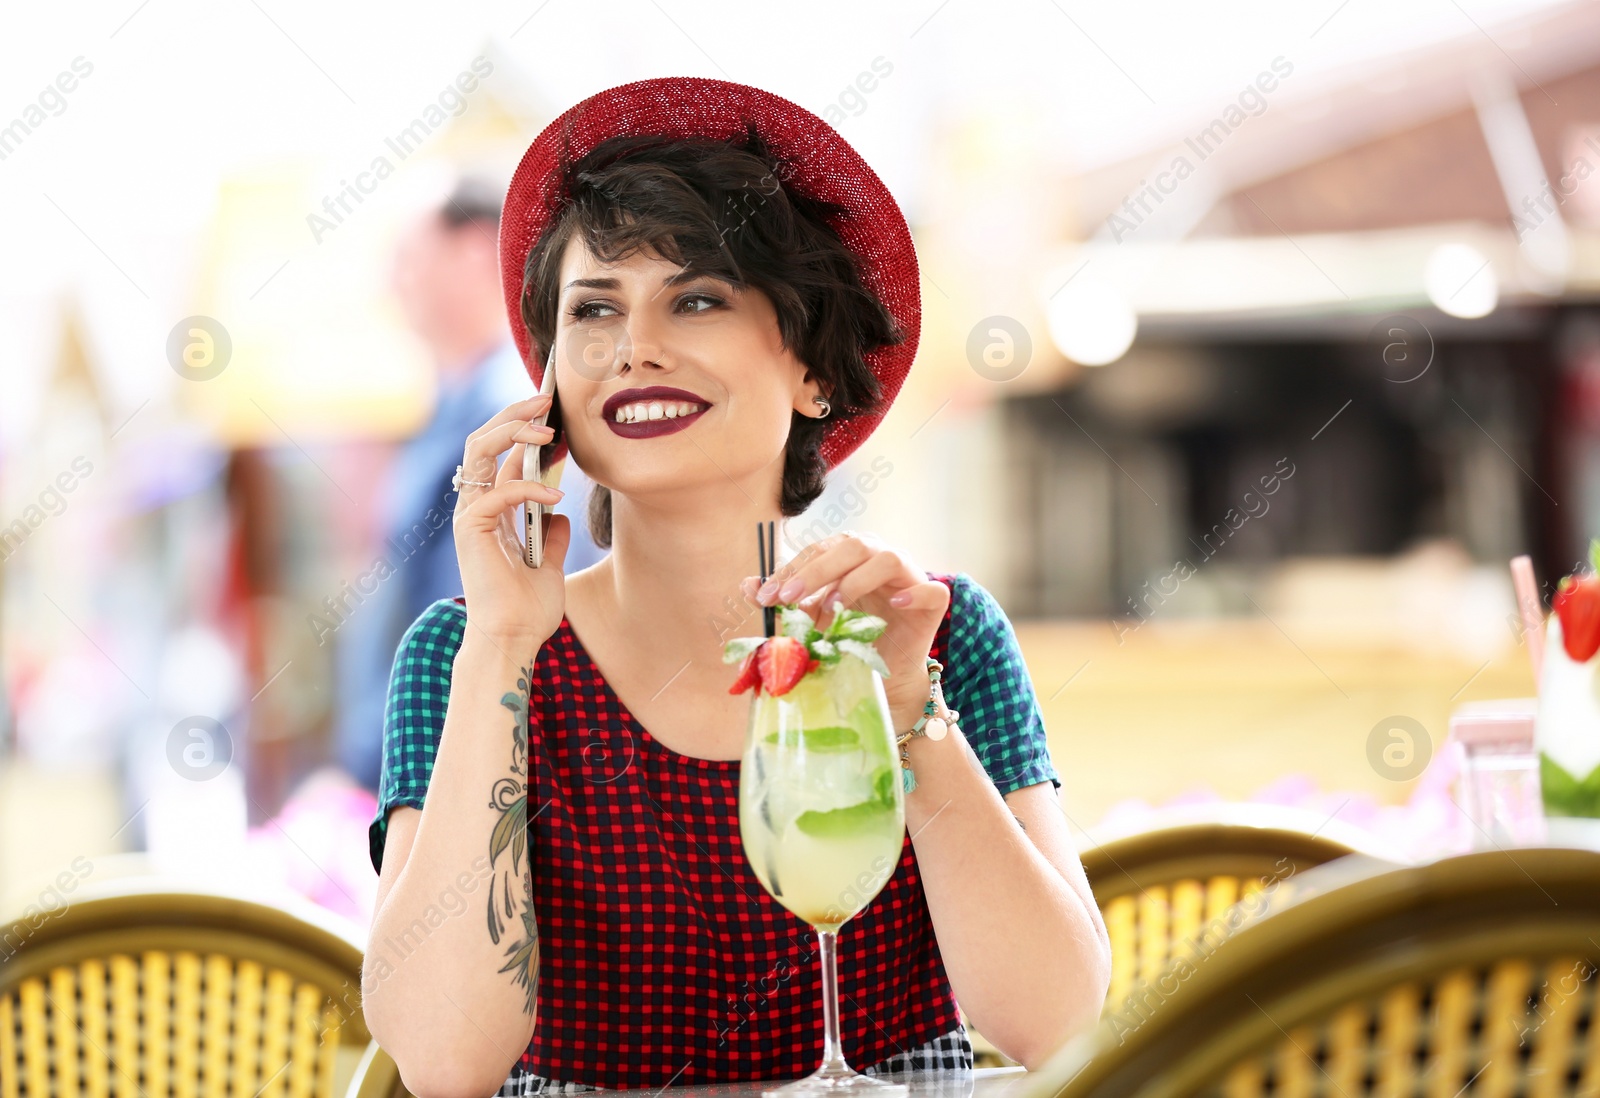 Photo of Young woman with glass of tasty lemonade talking on phone in open-air cafe